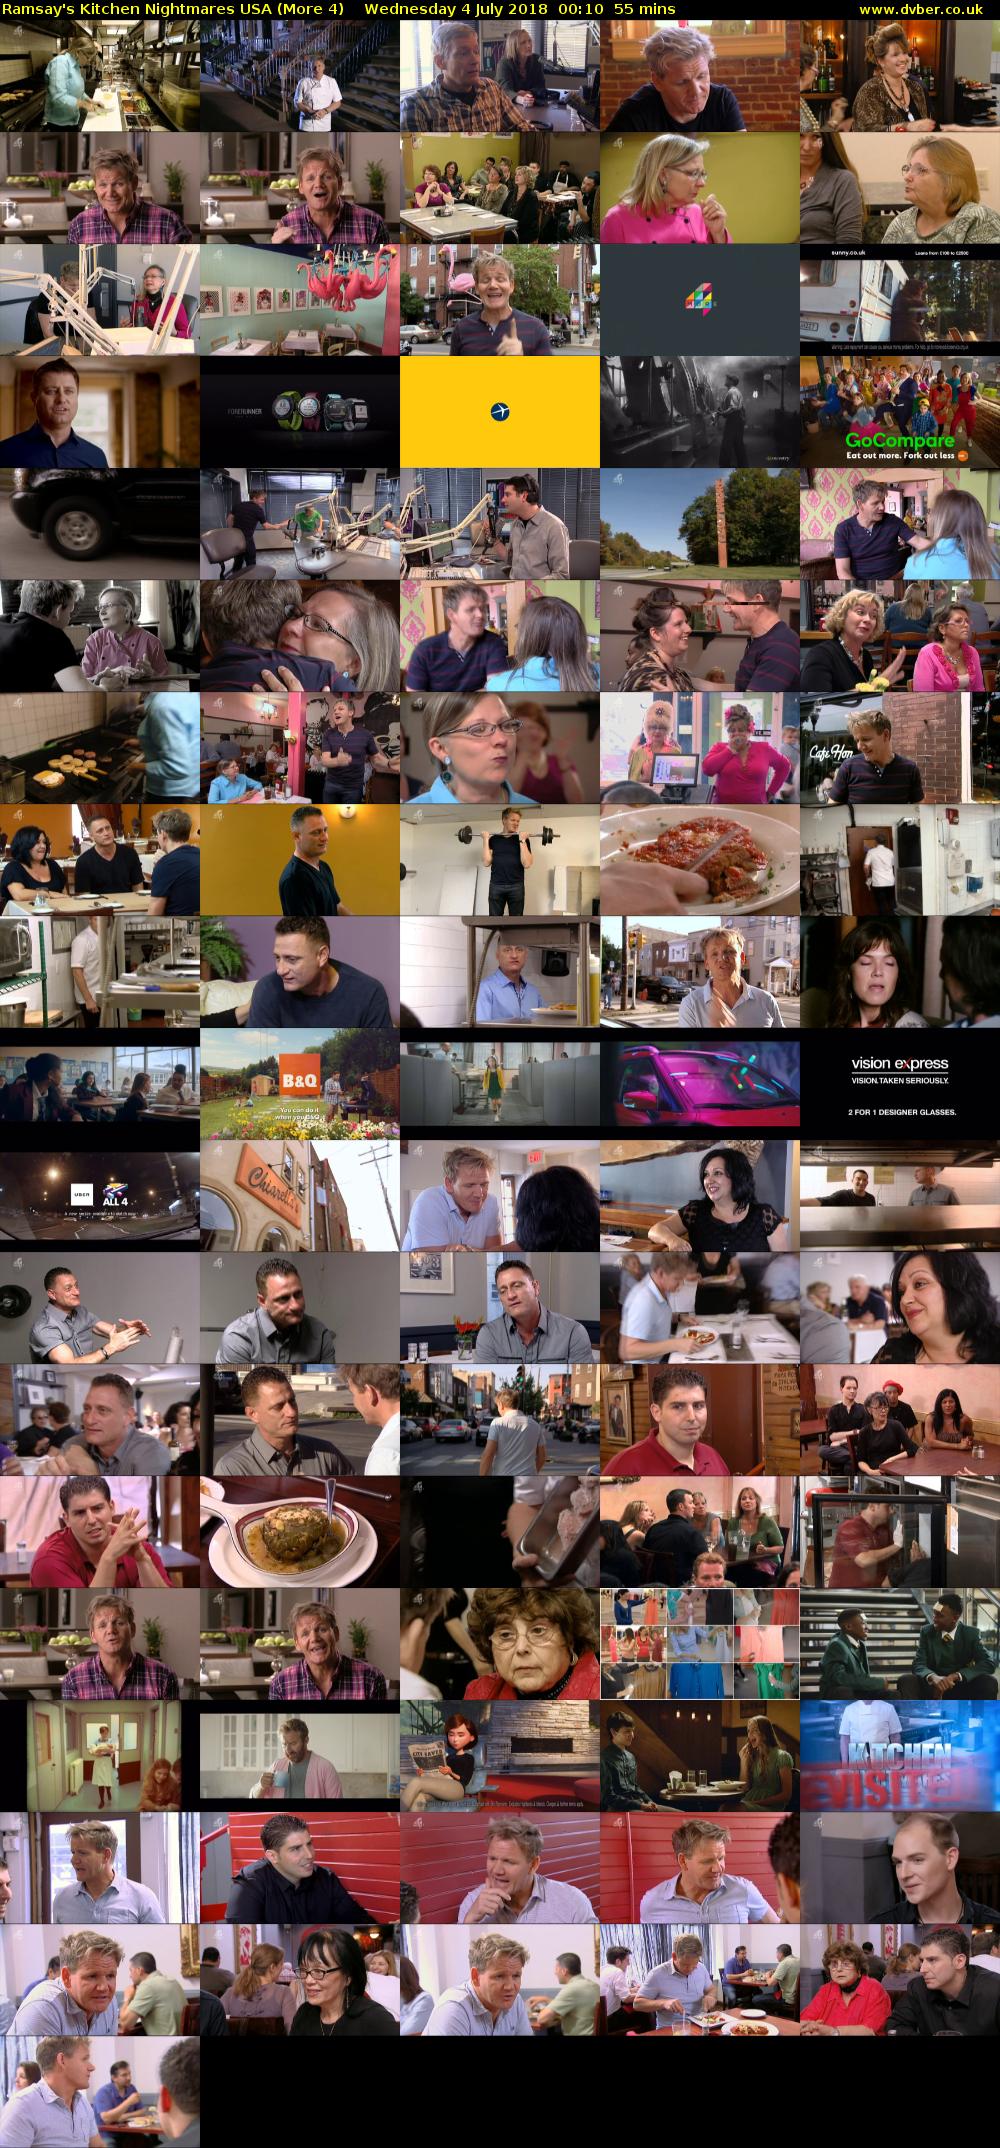 Ramsay's Kitchen Nightmares USA (More 4) Wednesday 4 July 2018 00:10 - 01:05